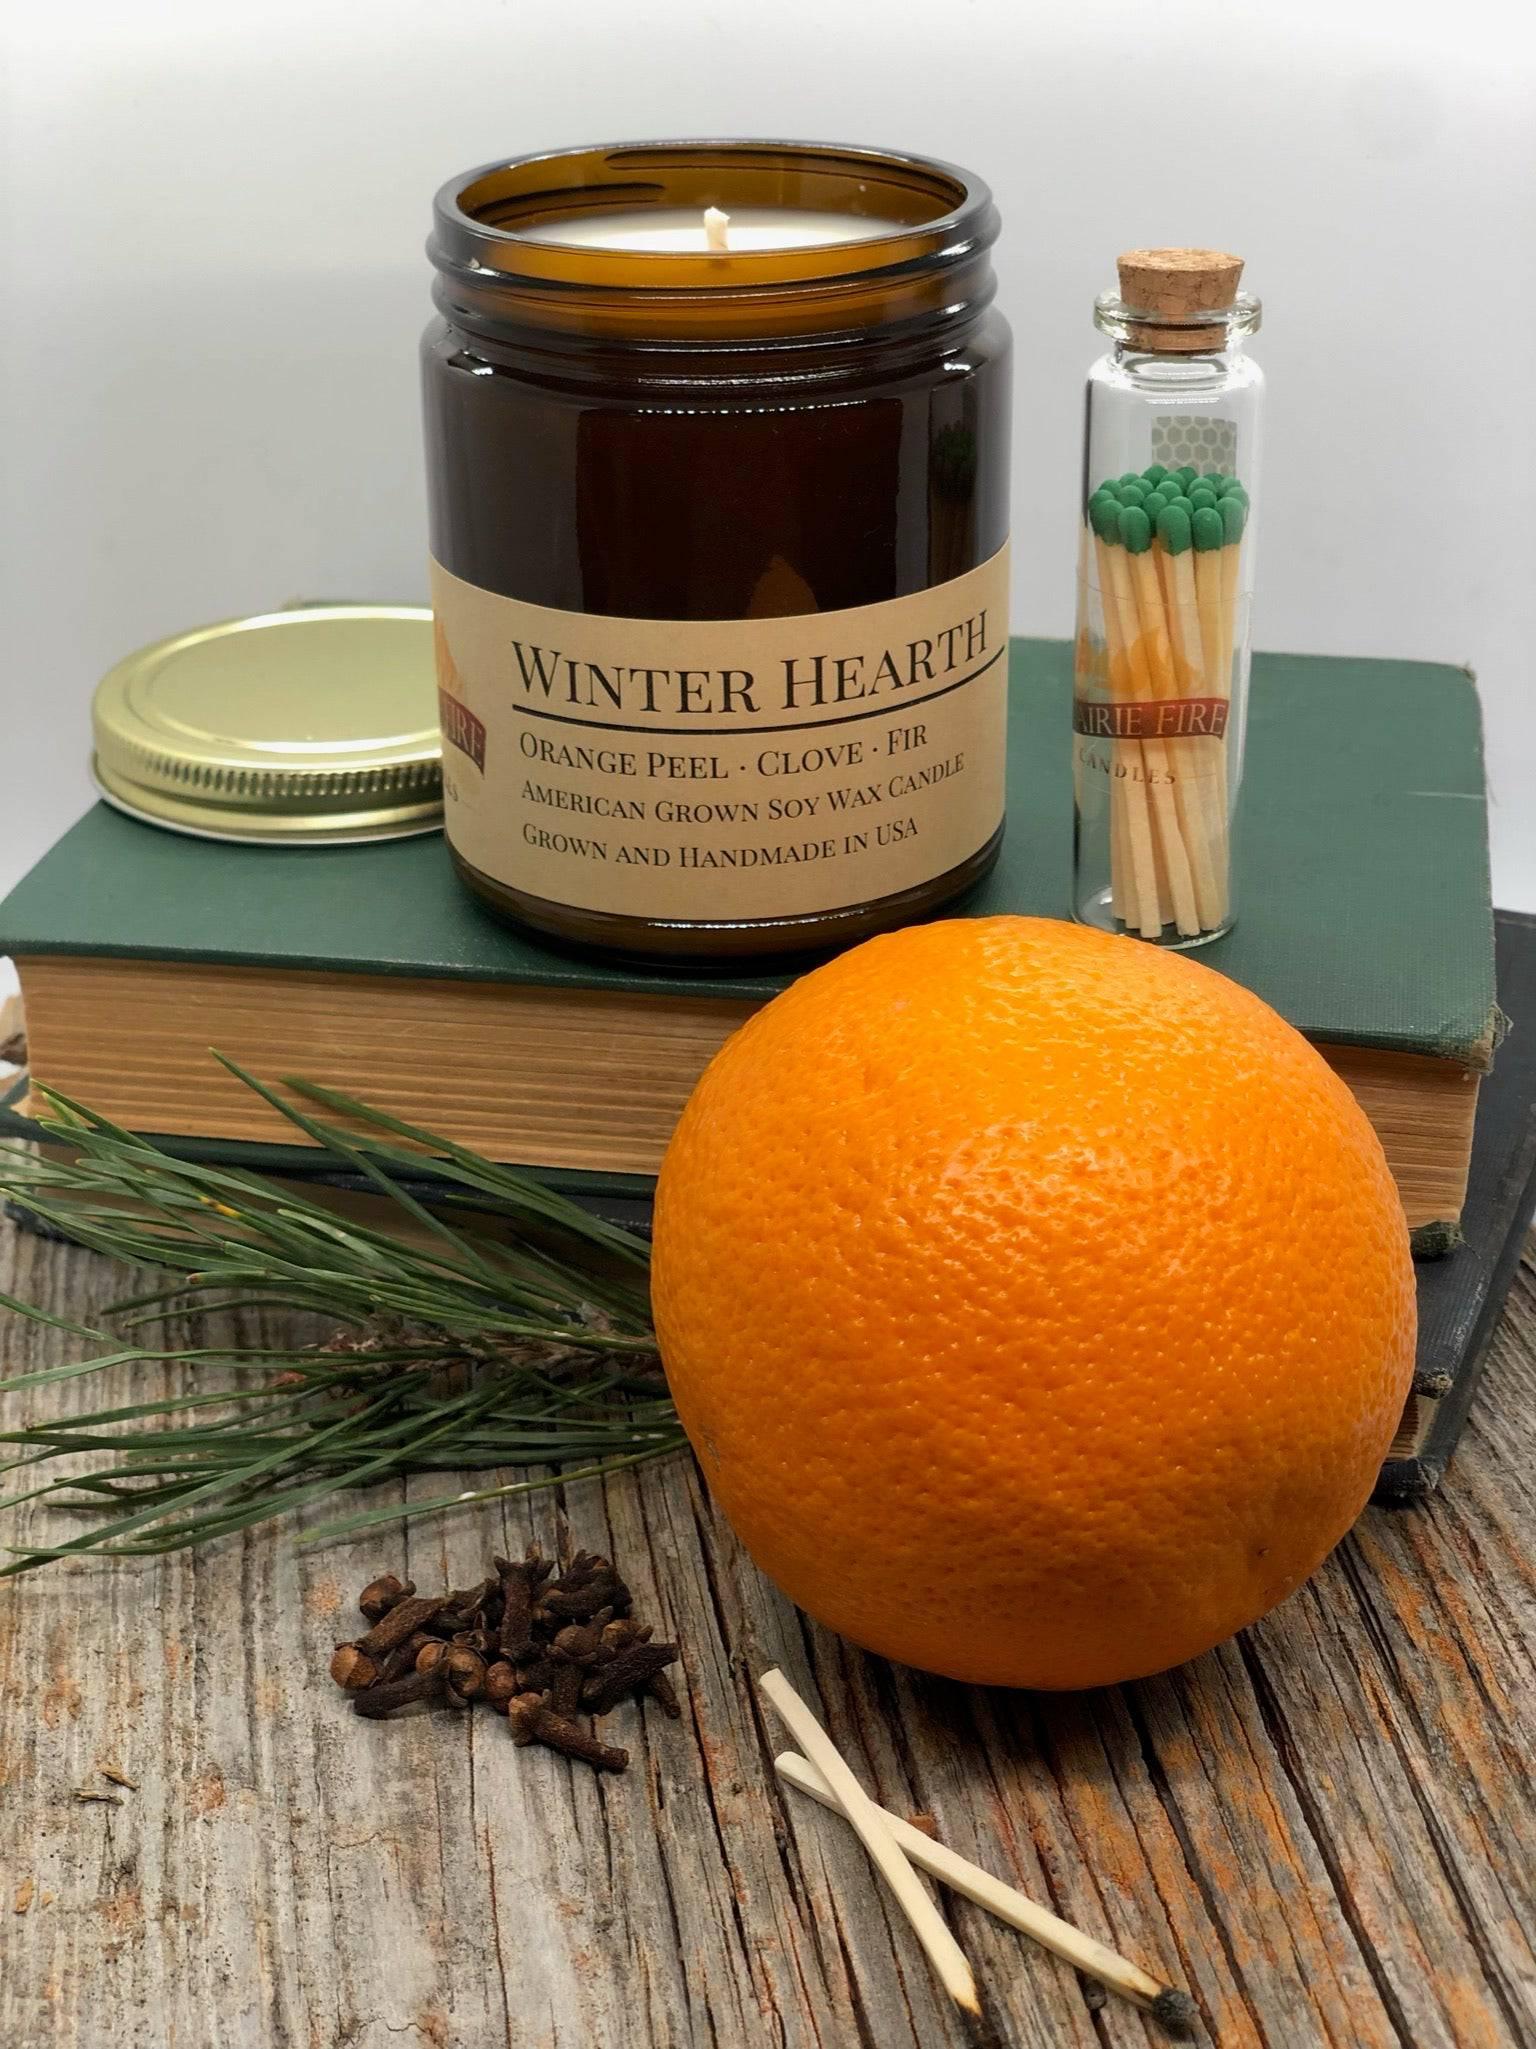 Winter Hearth Soy Wax Candle | 9 oz Amber Apothecary Jar - Prairie Fire Candles